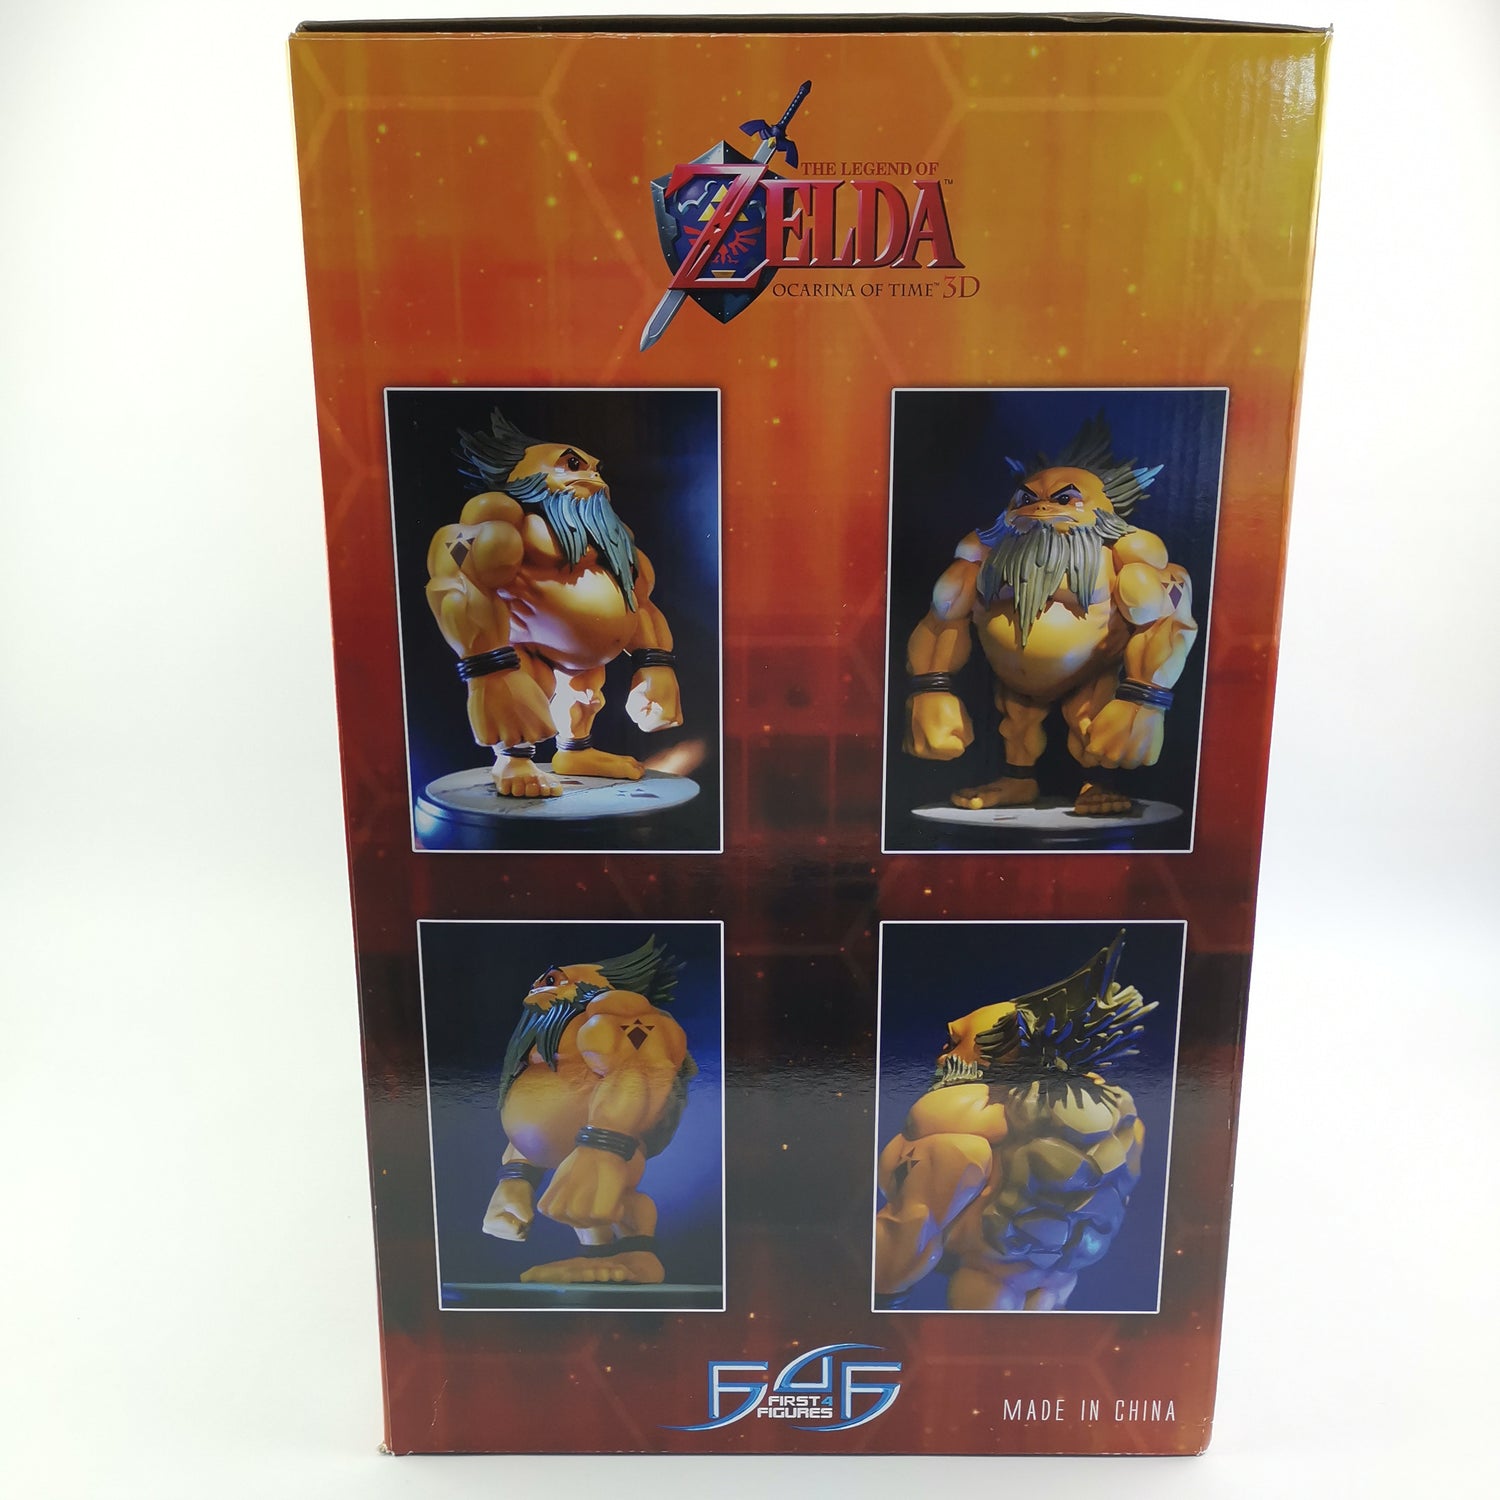 First 4 Figures 15 INCH Collectible Statue: The Legend of Zelda DARUNIA 1/1